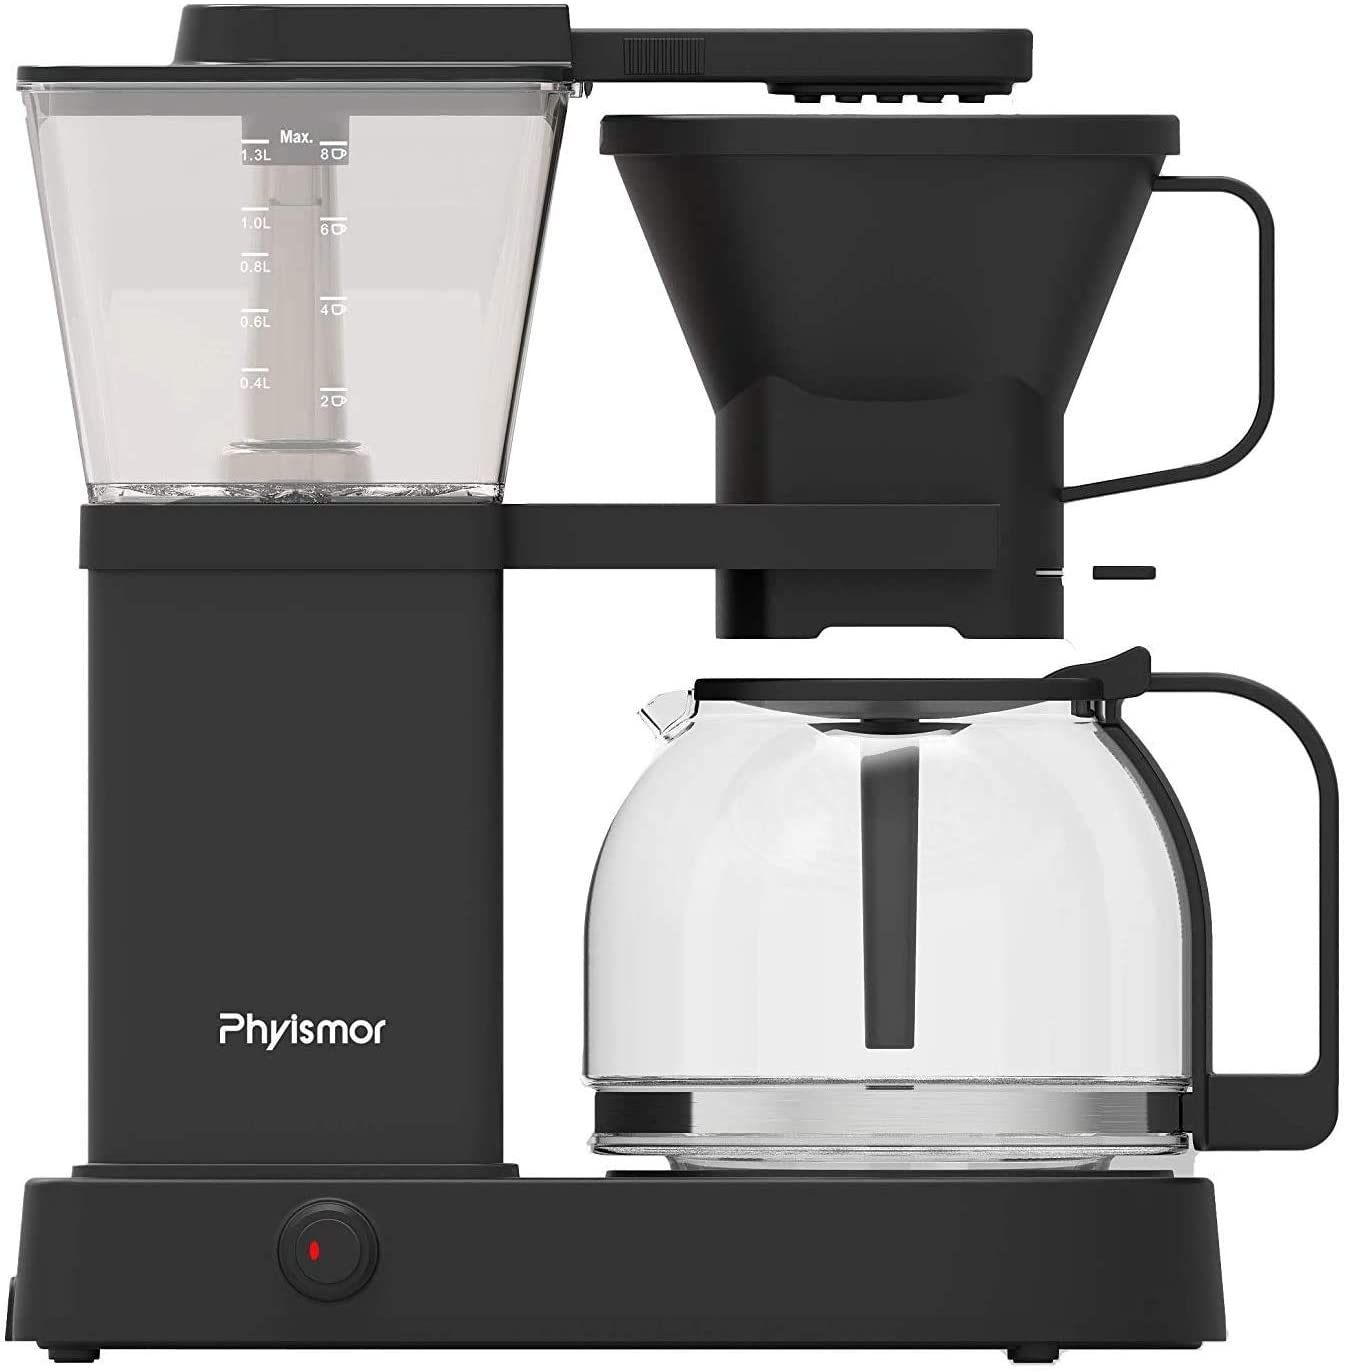 Drip Coffee Maker, 2-8 Cup Pour Over Coffee Brewer with Glass Carafe, Strength Control and High Temperature,Black $49.99